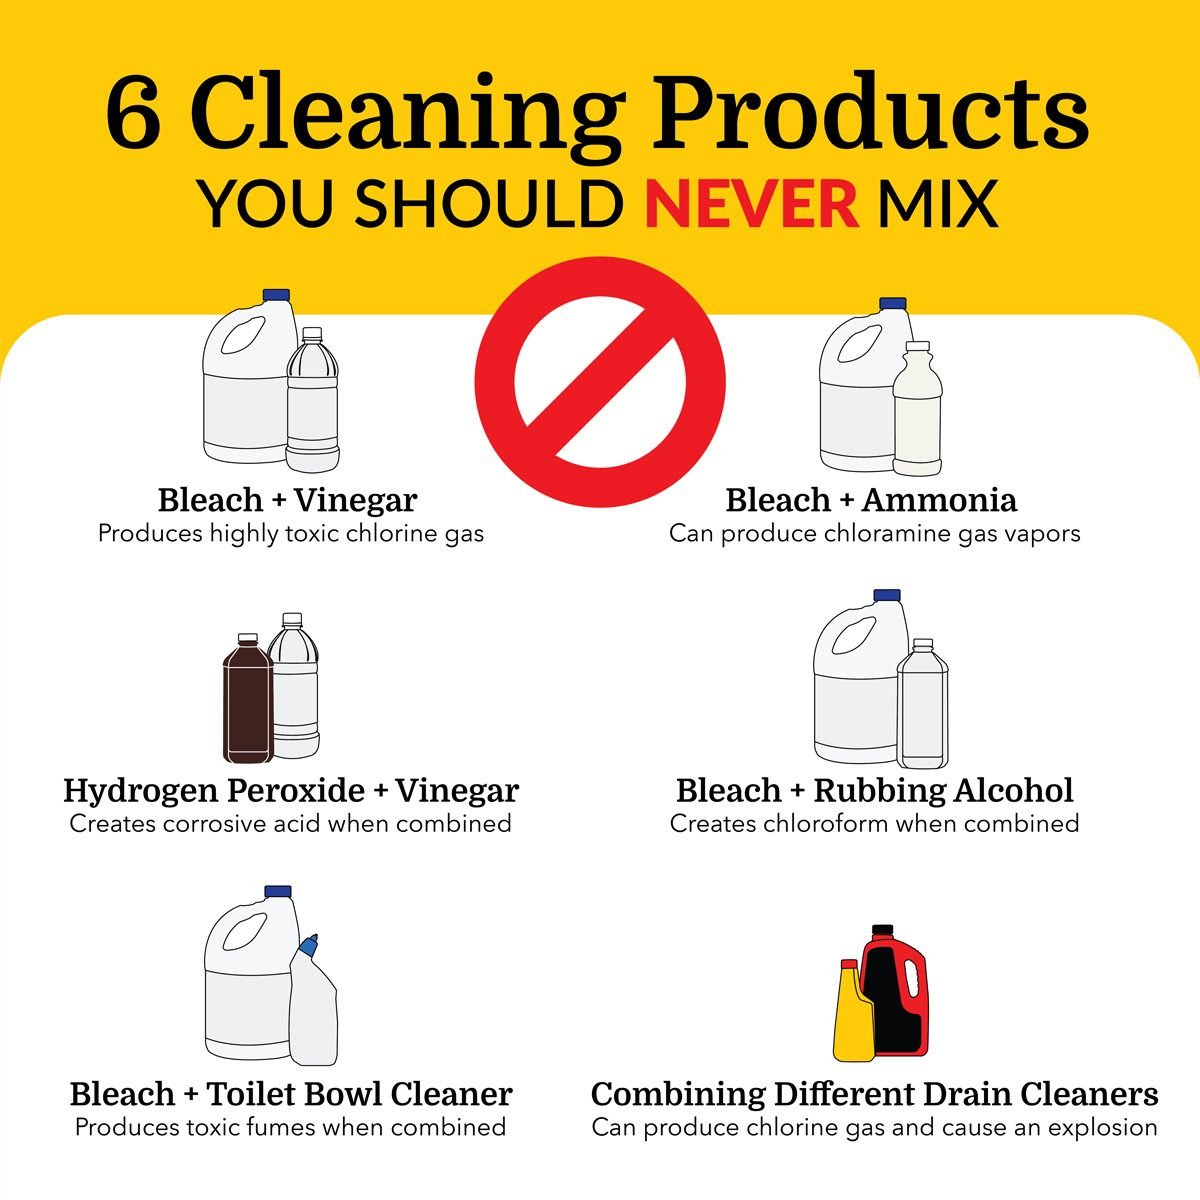 6 Cleaning Products You Should Never Mix | The Family Handyman